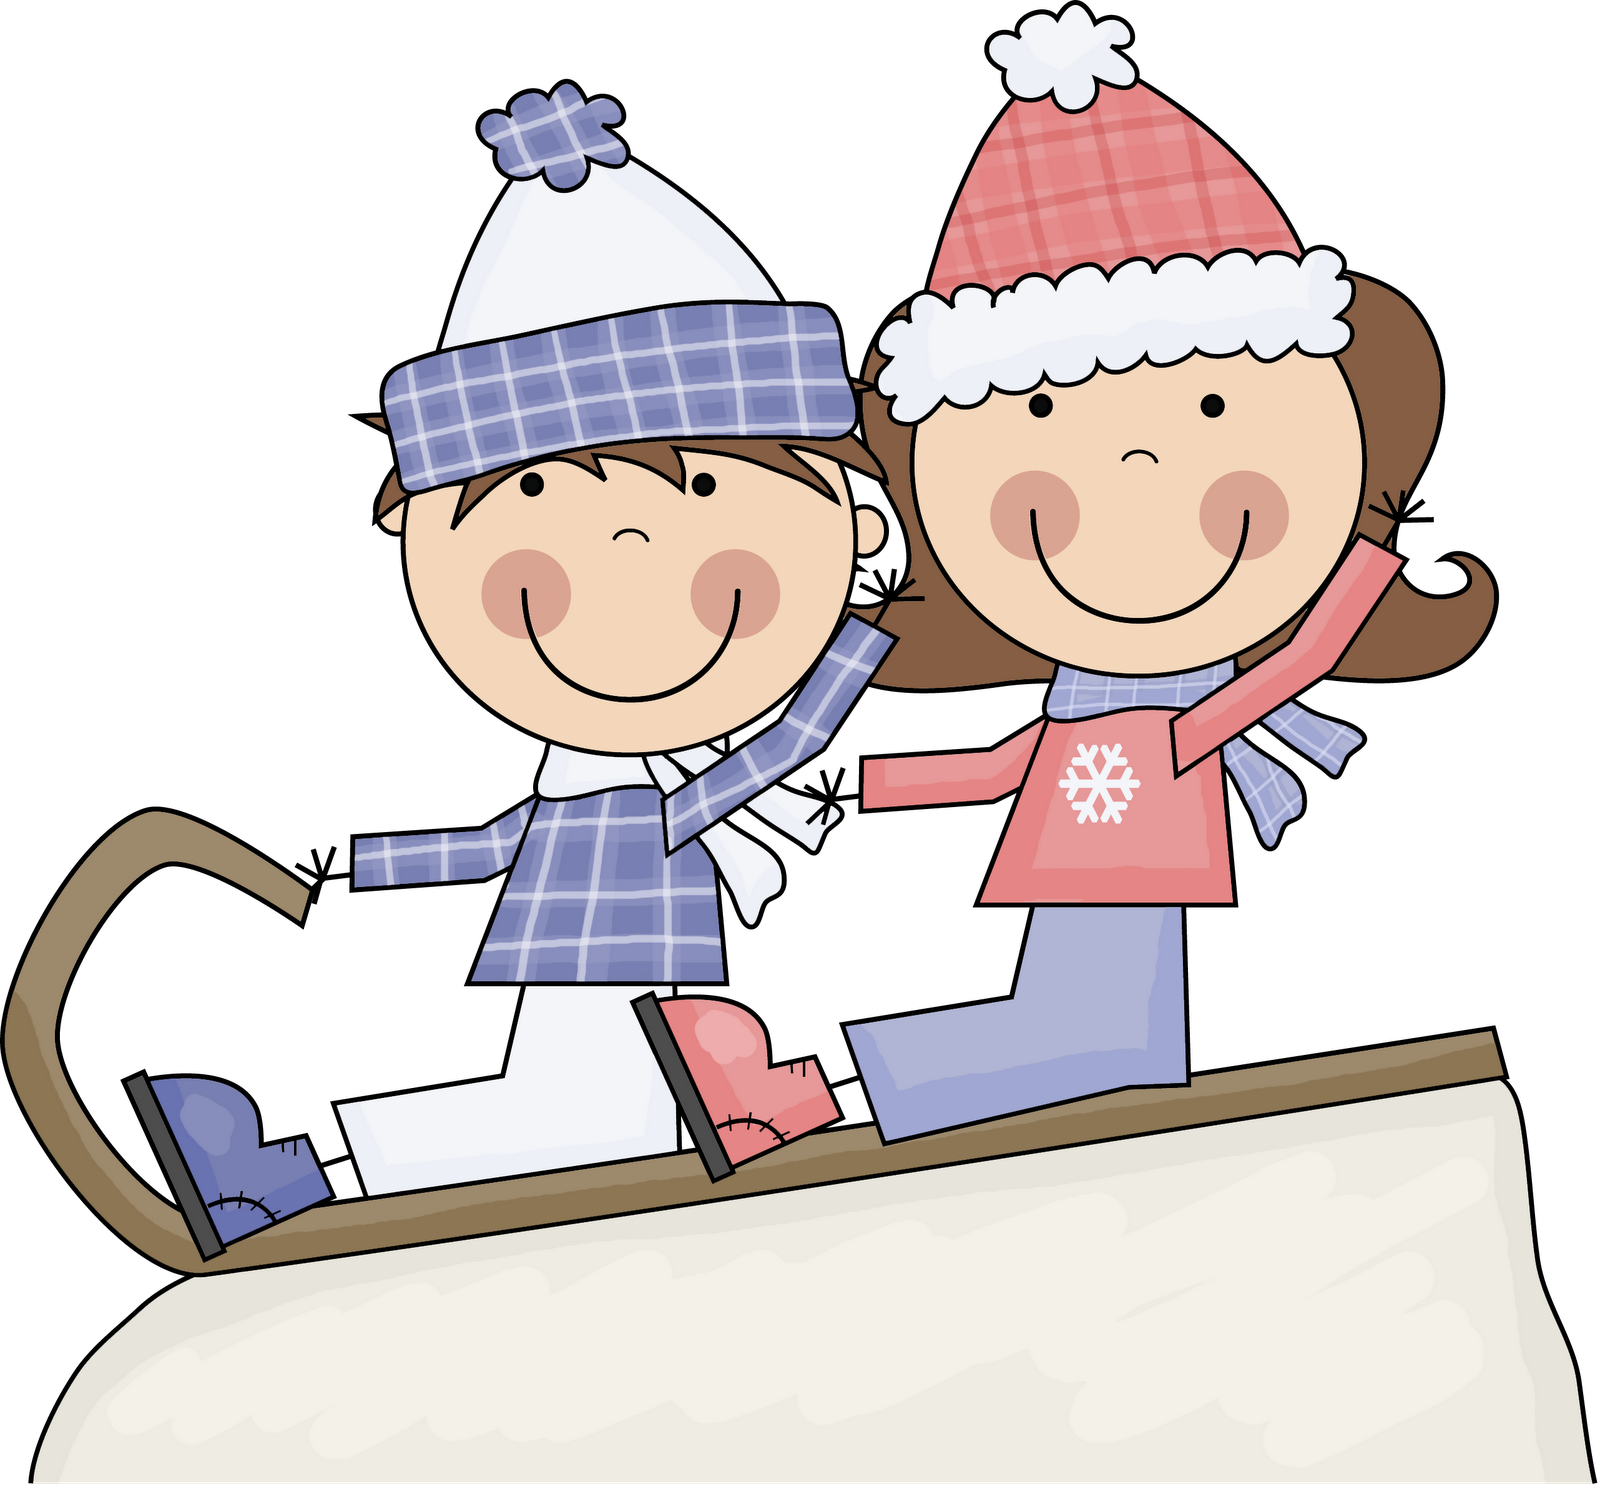  collection of kids. Sleigh clipart kid